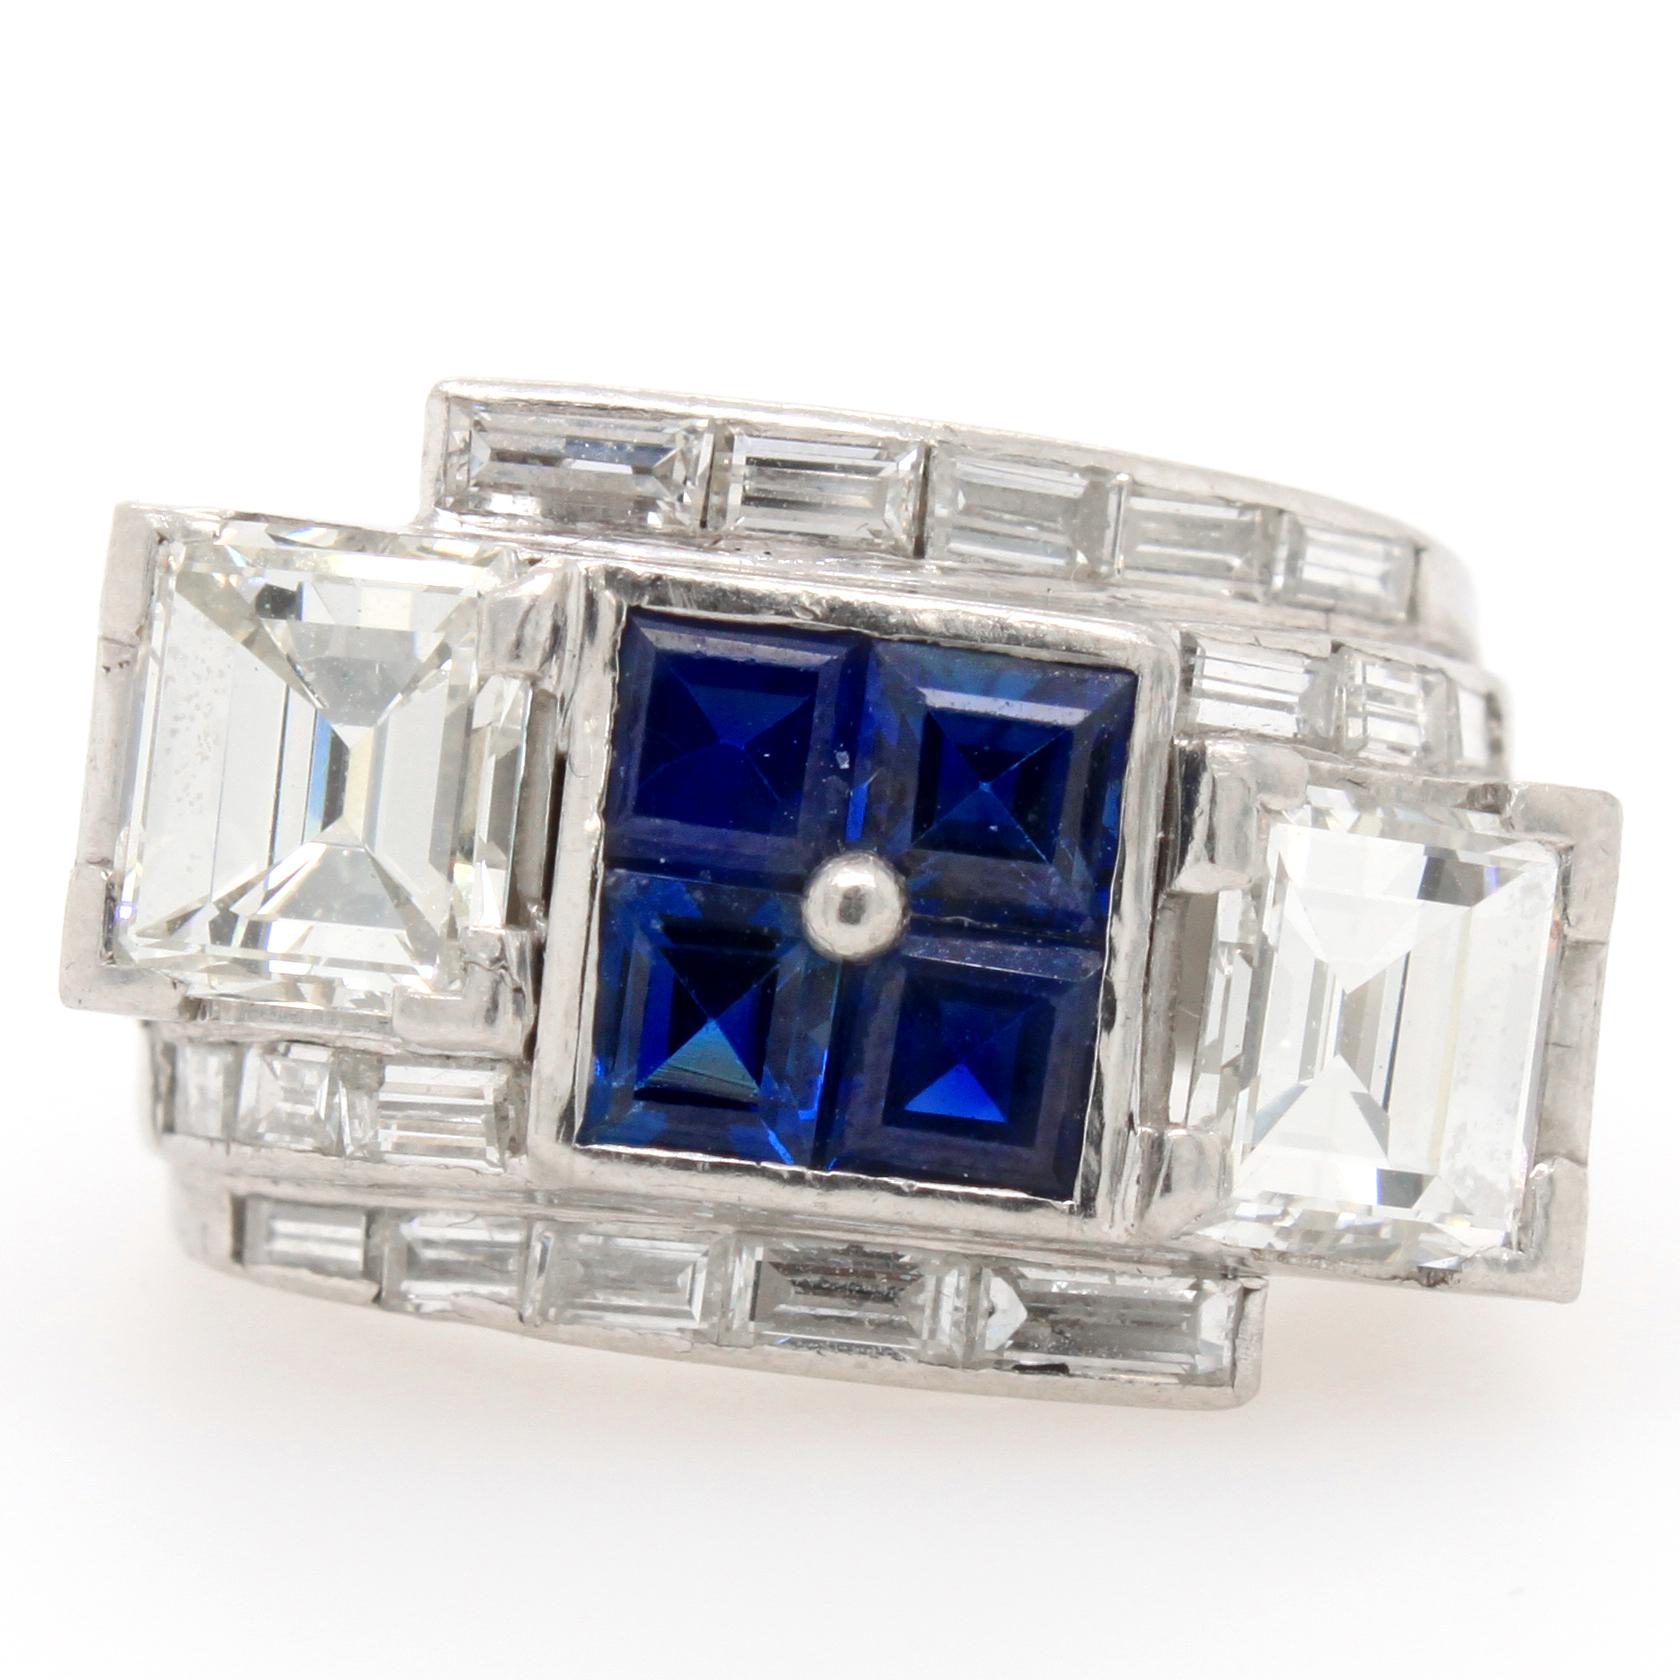 An Art Deco ring with sapphires and diamonds in platinum, ca. 1930s. The four sapphire carrés in the centre are flanked by two bigger square cut diamonds on the border of the top and bottom side. The profile of the ring shows a beautiful design with